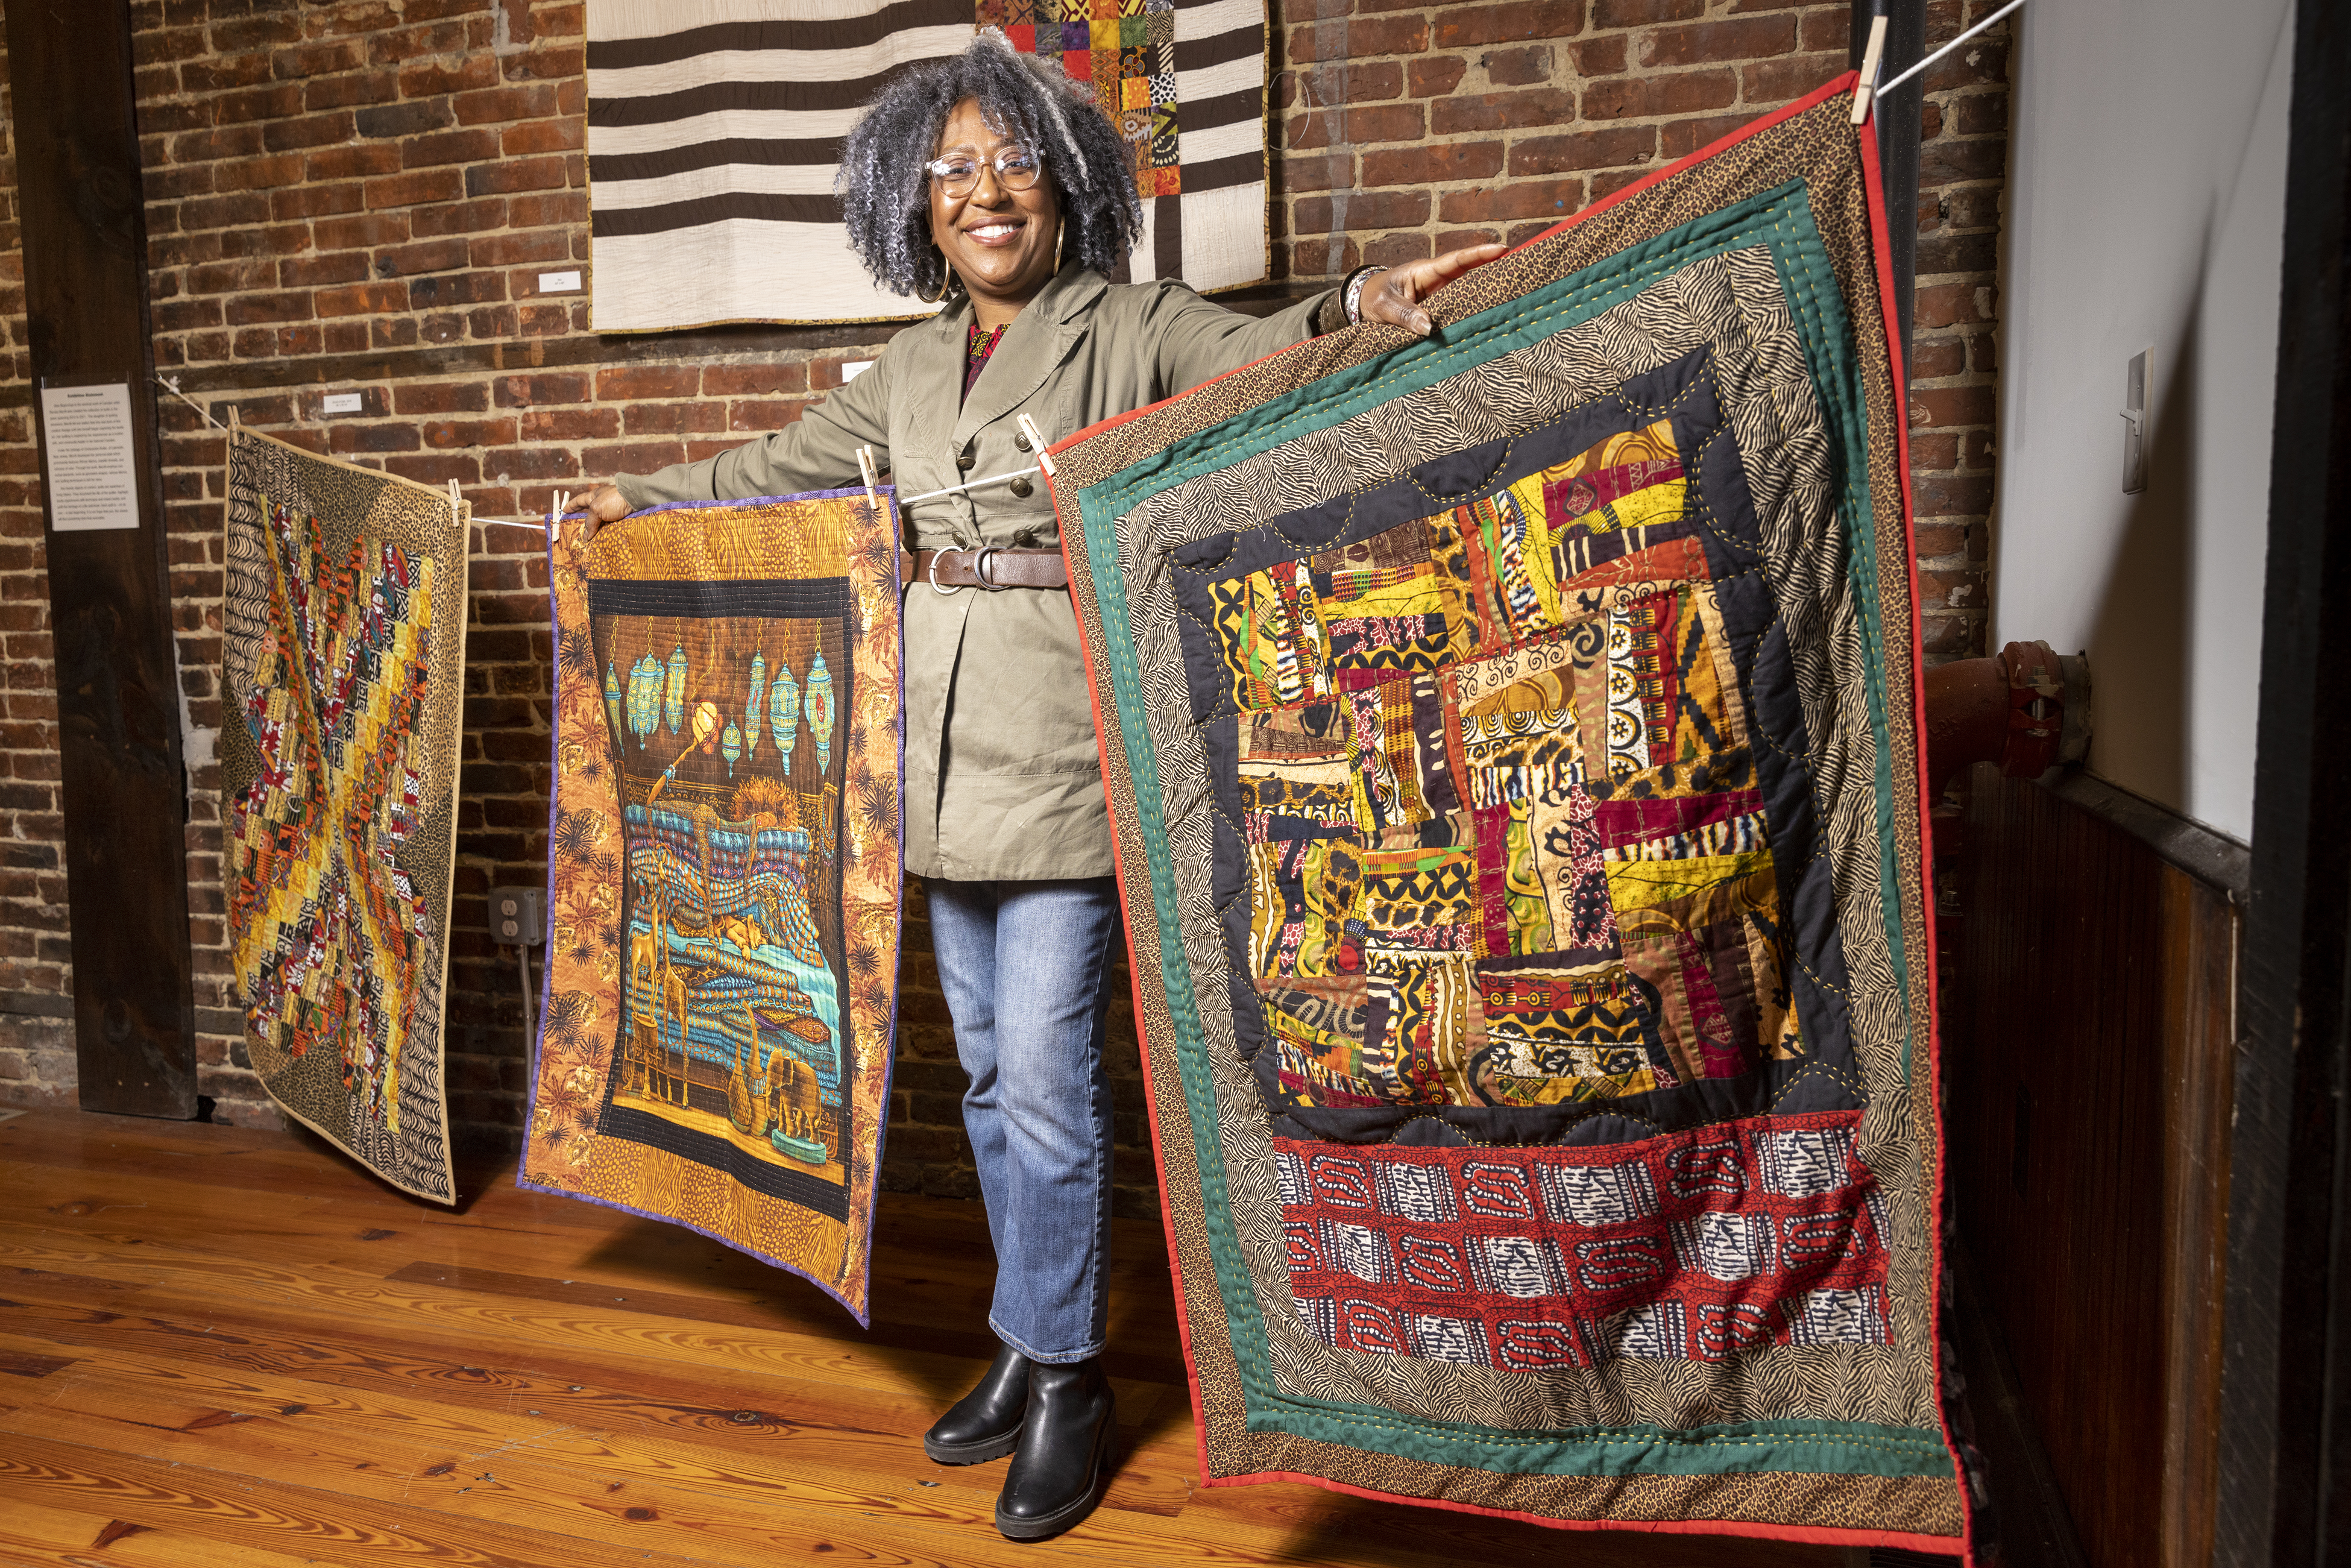 The Surprisingly Radical History of Quilting, Smart News